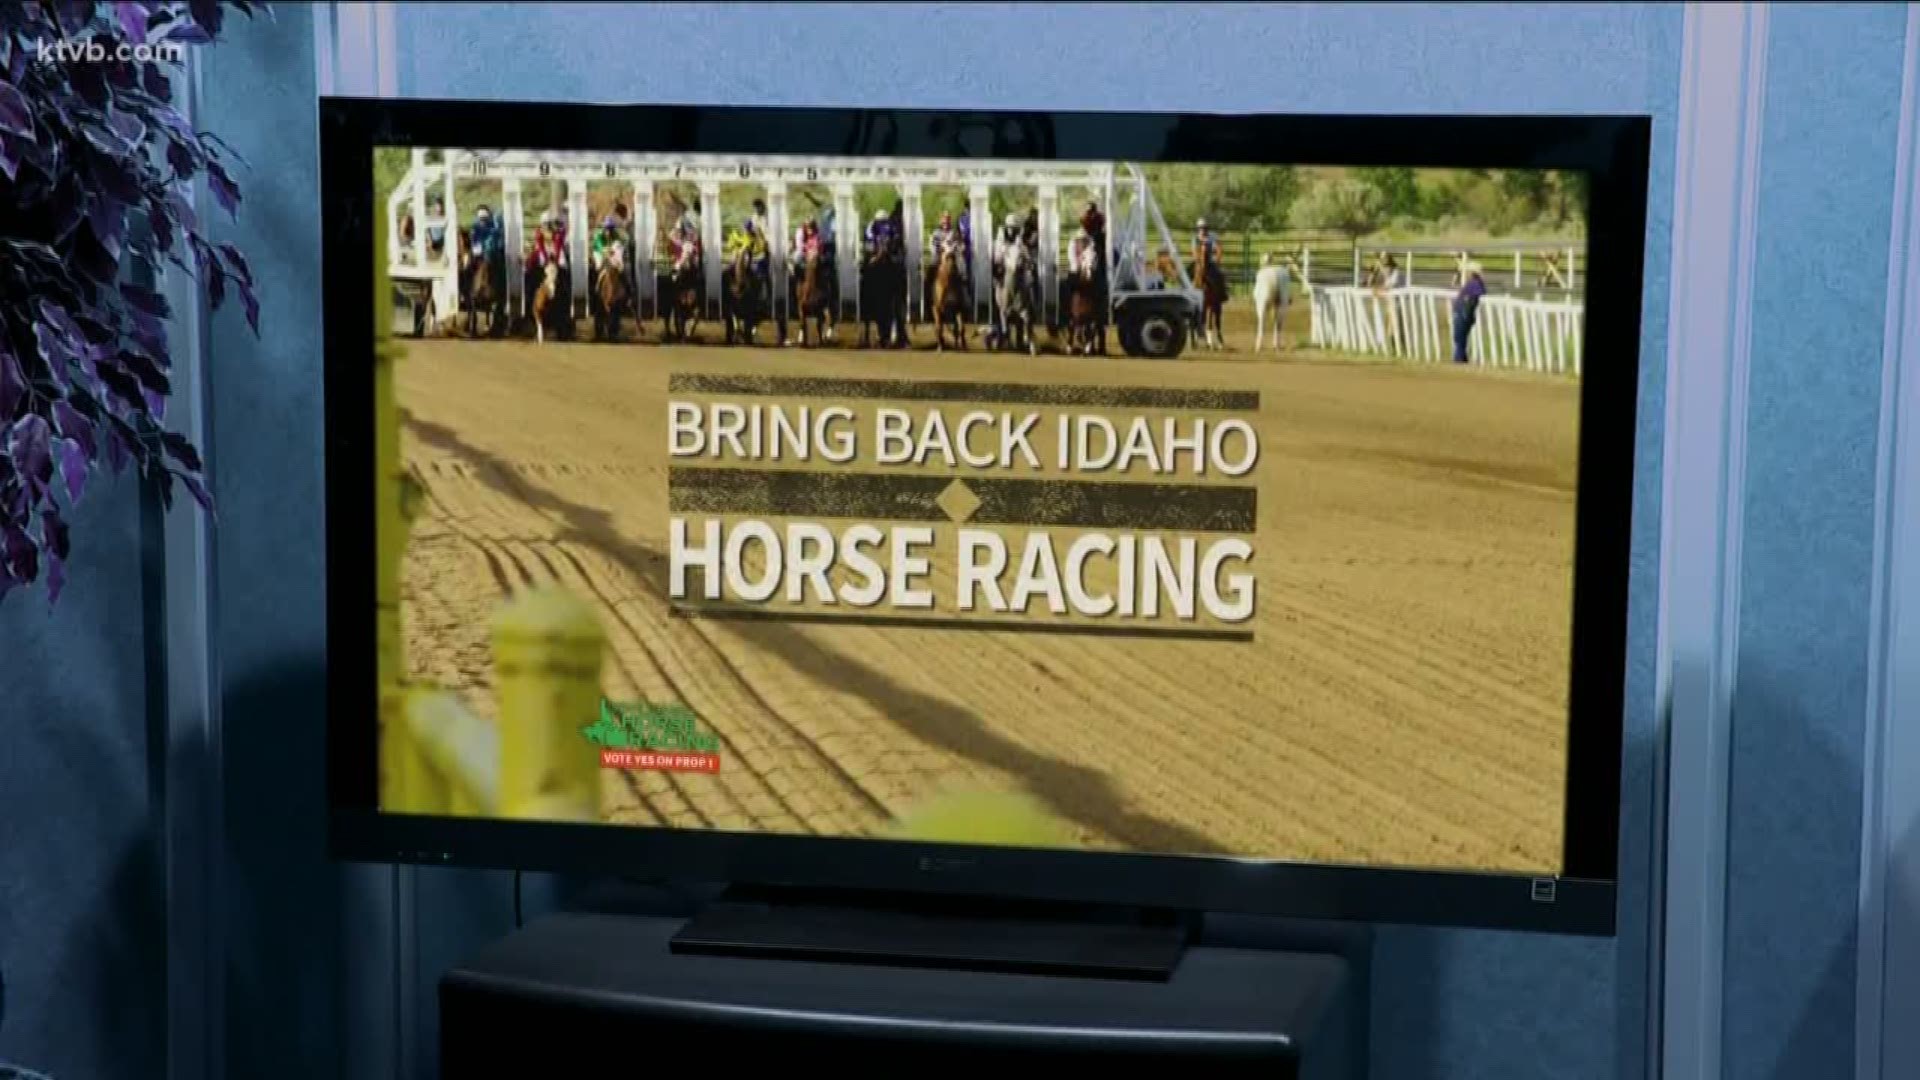 If approved by Idaho voters in the November 6 election, historical horse racing machines would be made legal at certain places in the state where simulcast racing occurs.